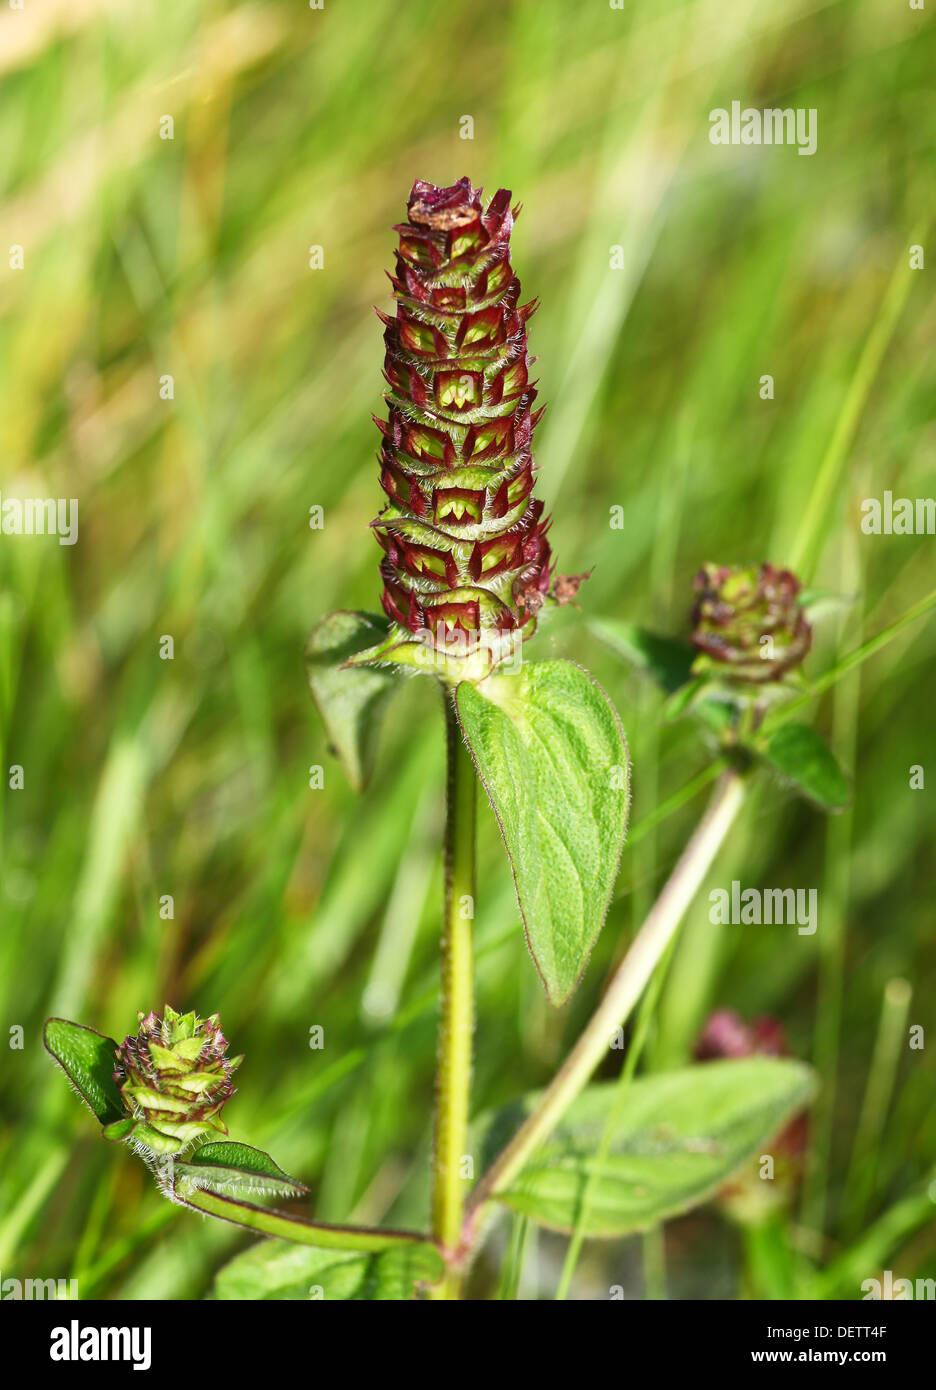 Seed head of common self-heal or heal-all known as Prunella vulgaris Stock Photo